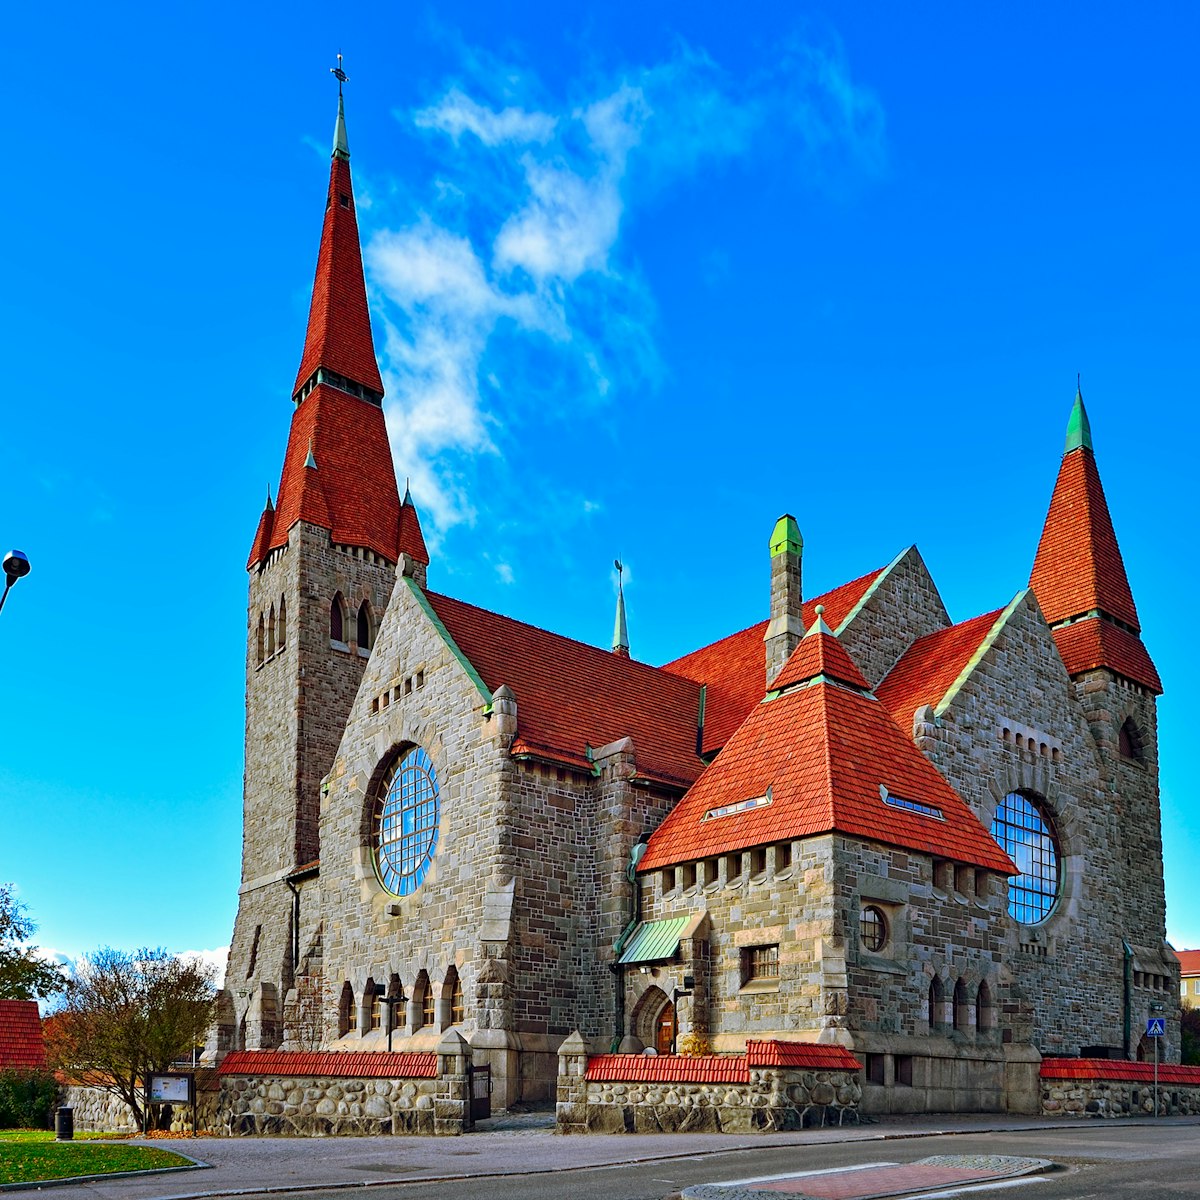 Medieval Tampere cathedral in Finland (Finnish Tampereen tuomiokirkko, Swedish Tammerfors domkyrka) is a church in Tampere, Finland. The cathedral was built between 1902 and 1907.; Shutterstock ID 71066653; Your name (First / Last): Gemma Graham; GL account no.: 65050; Netsuite department name: Online Editorial; Full Product or Project name including edition: POI imagery for LP.com